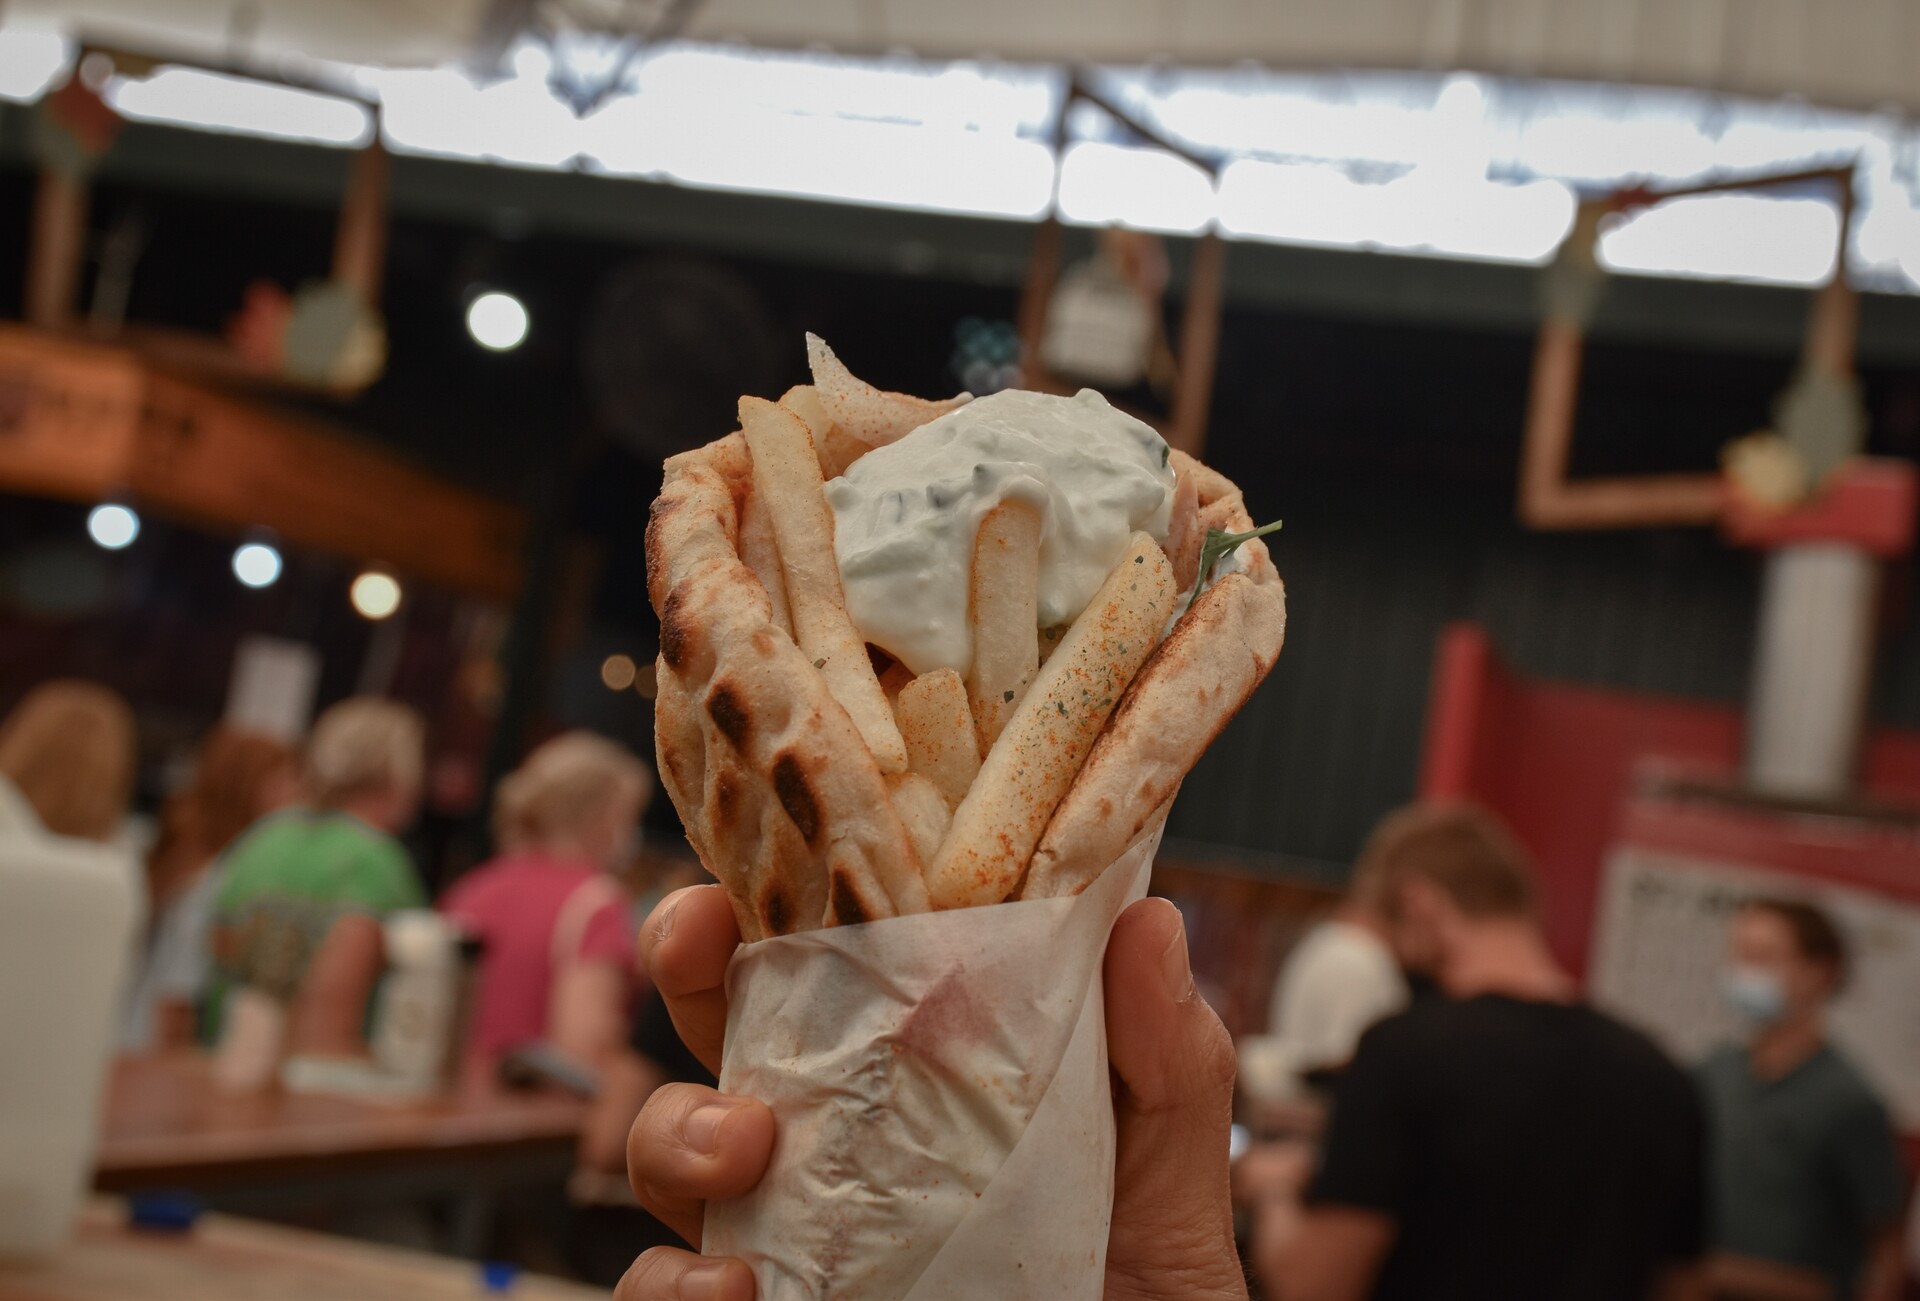 A person holding a gyro